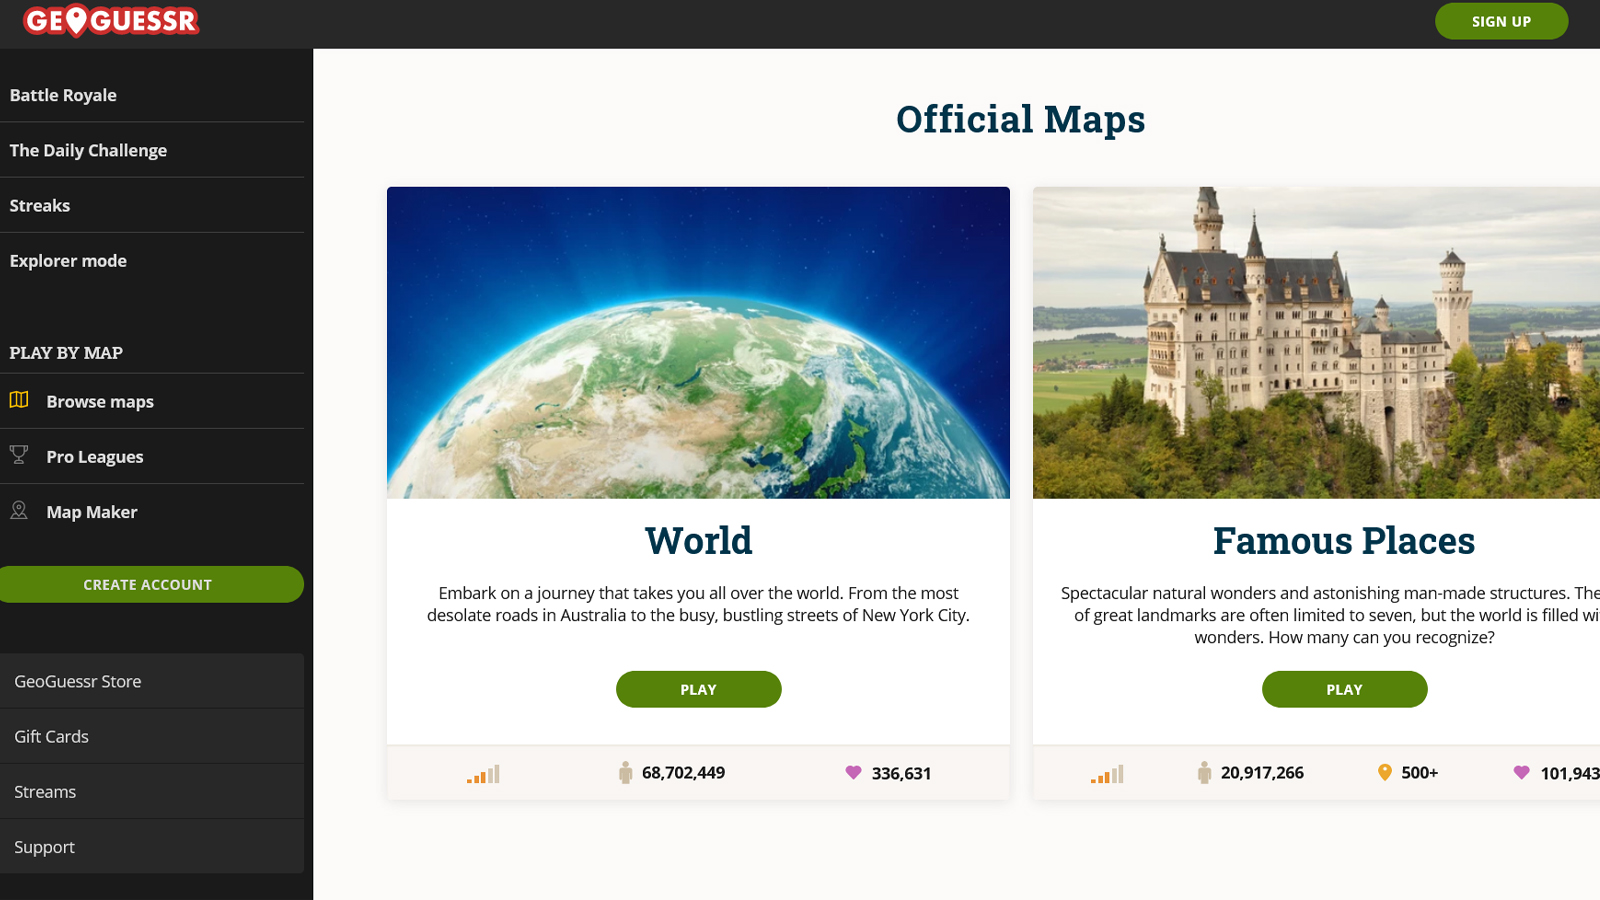 Get feedback from a vast remote working audience about GeoGuessr